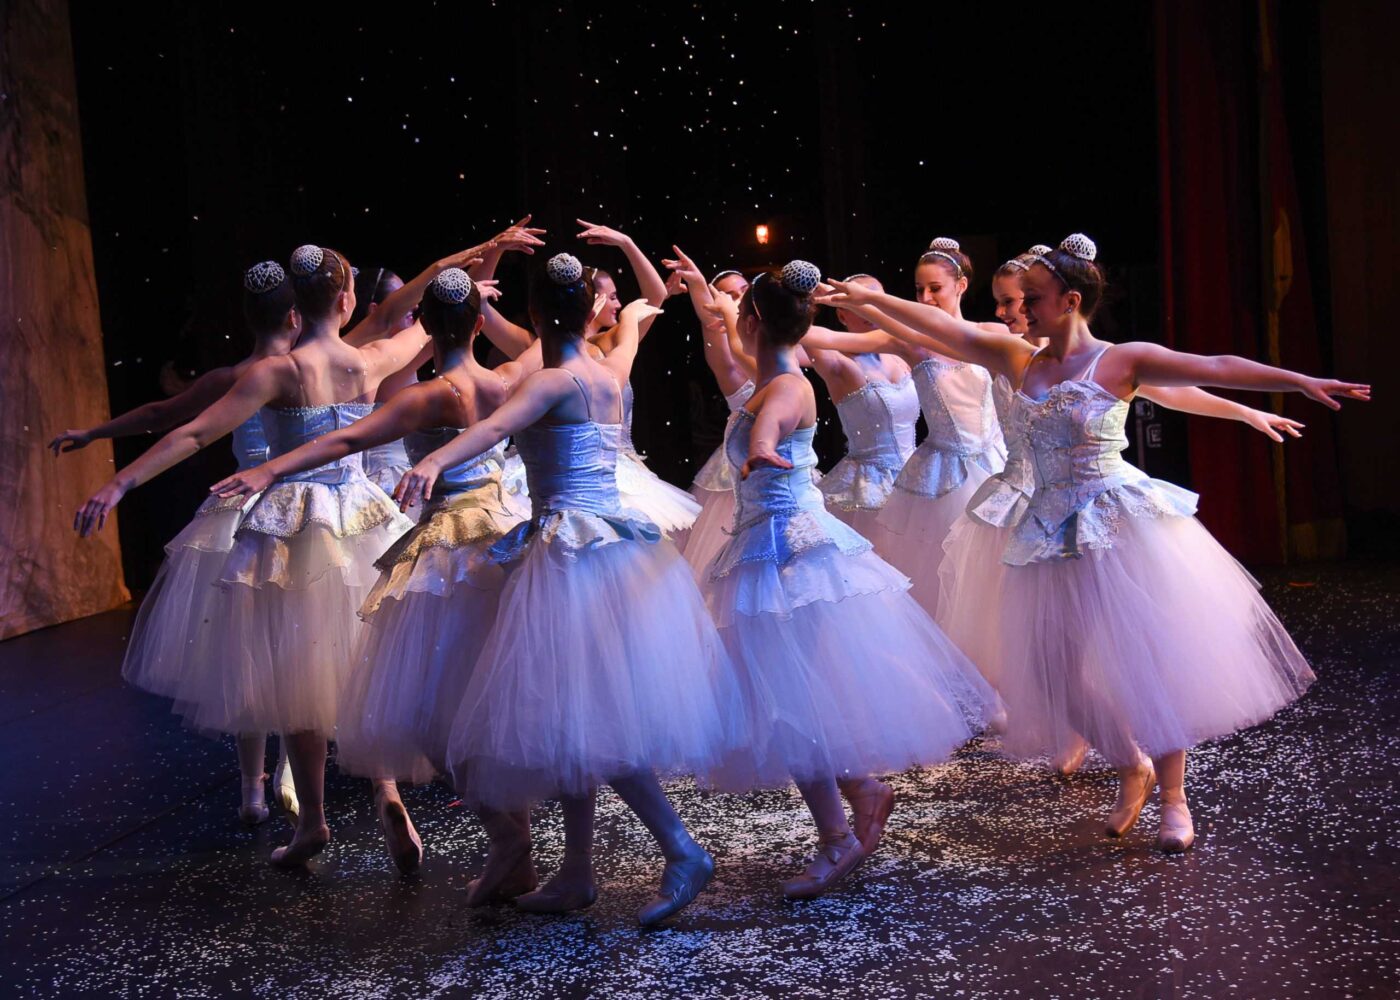 a group of ballerinas standing on a stage.